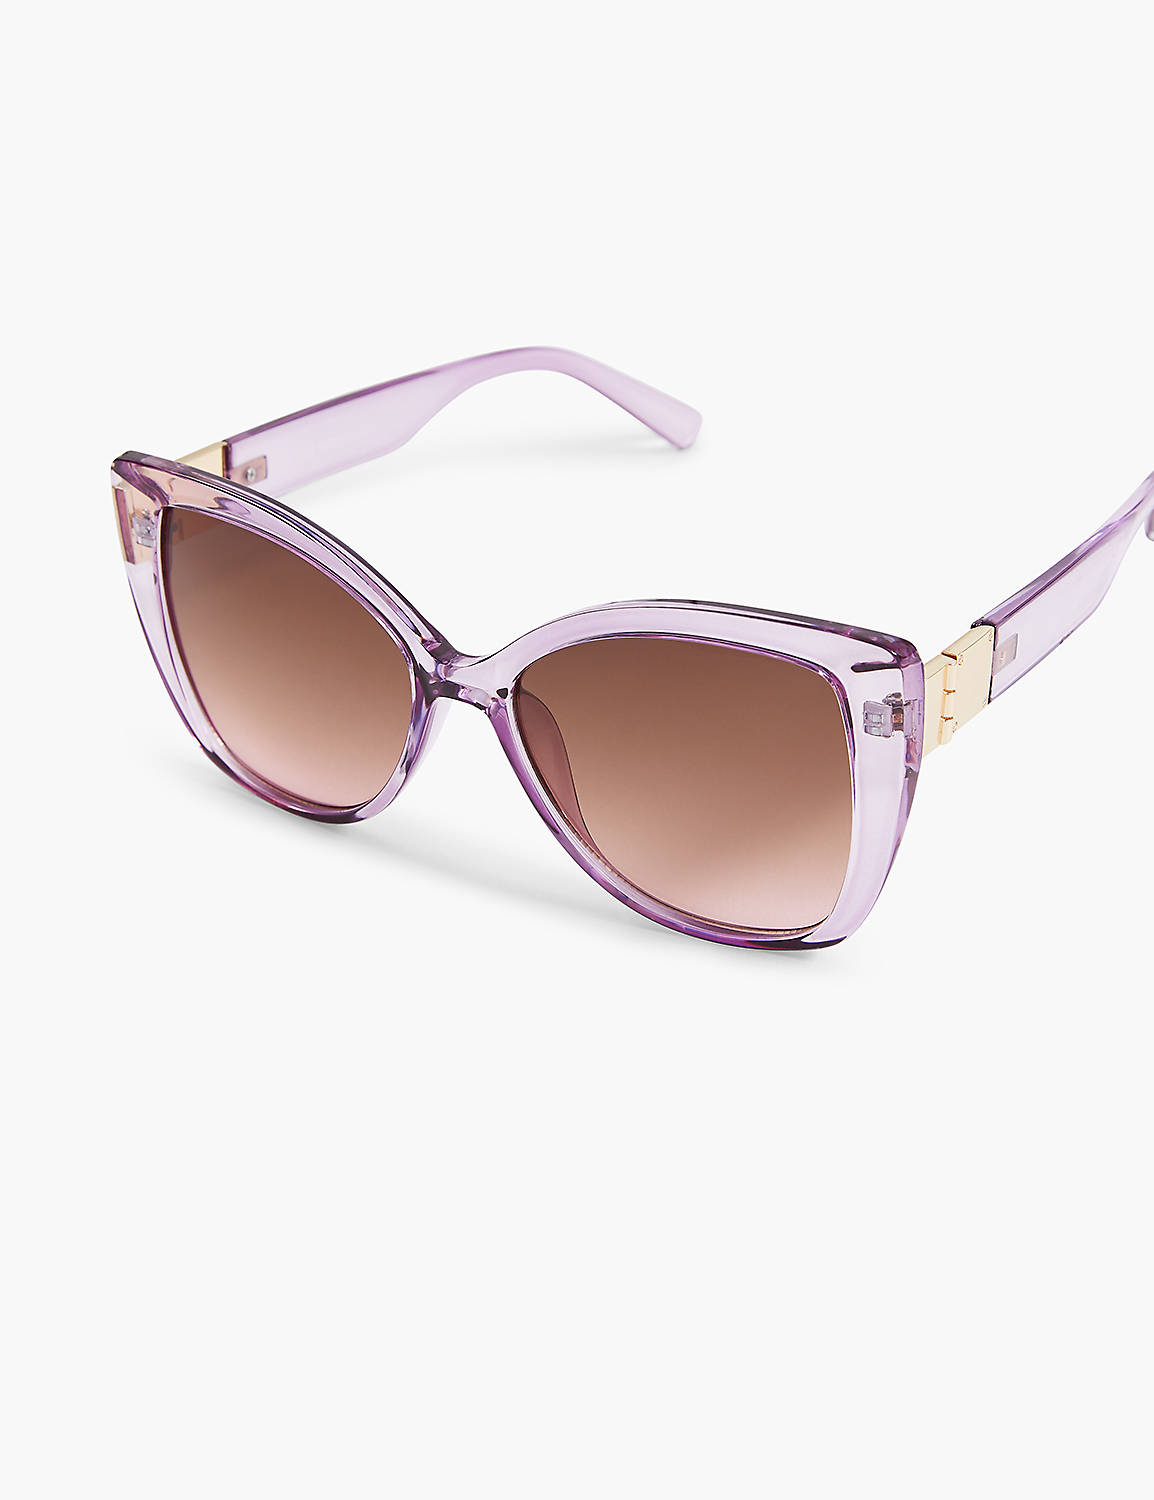 Violet Tulip Jelly Cat Eye Sunglass Product Image 1